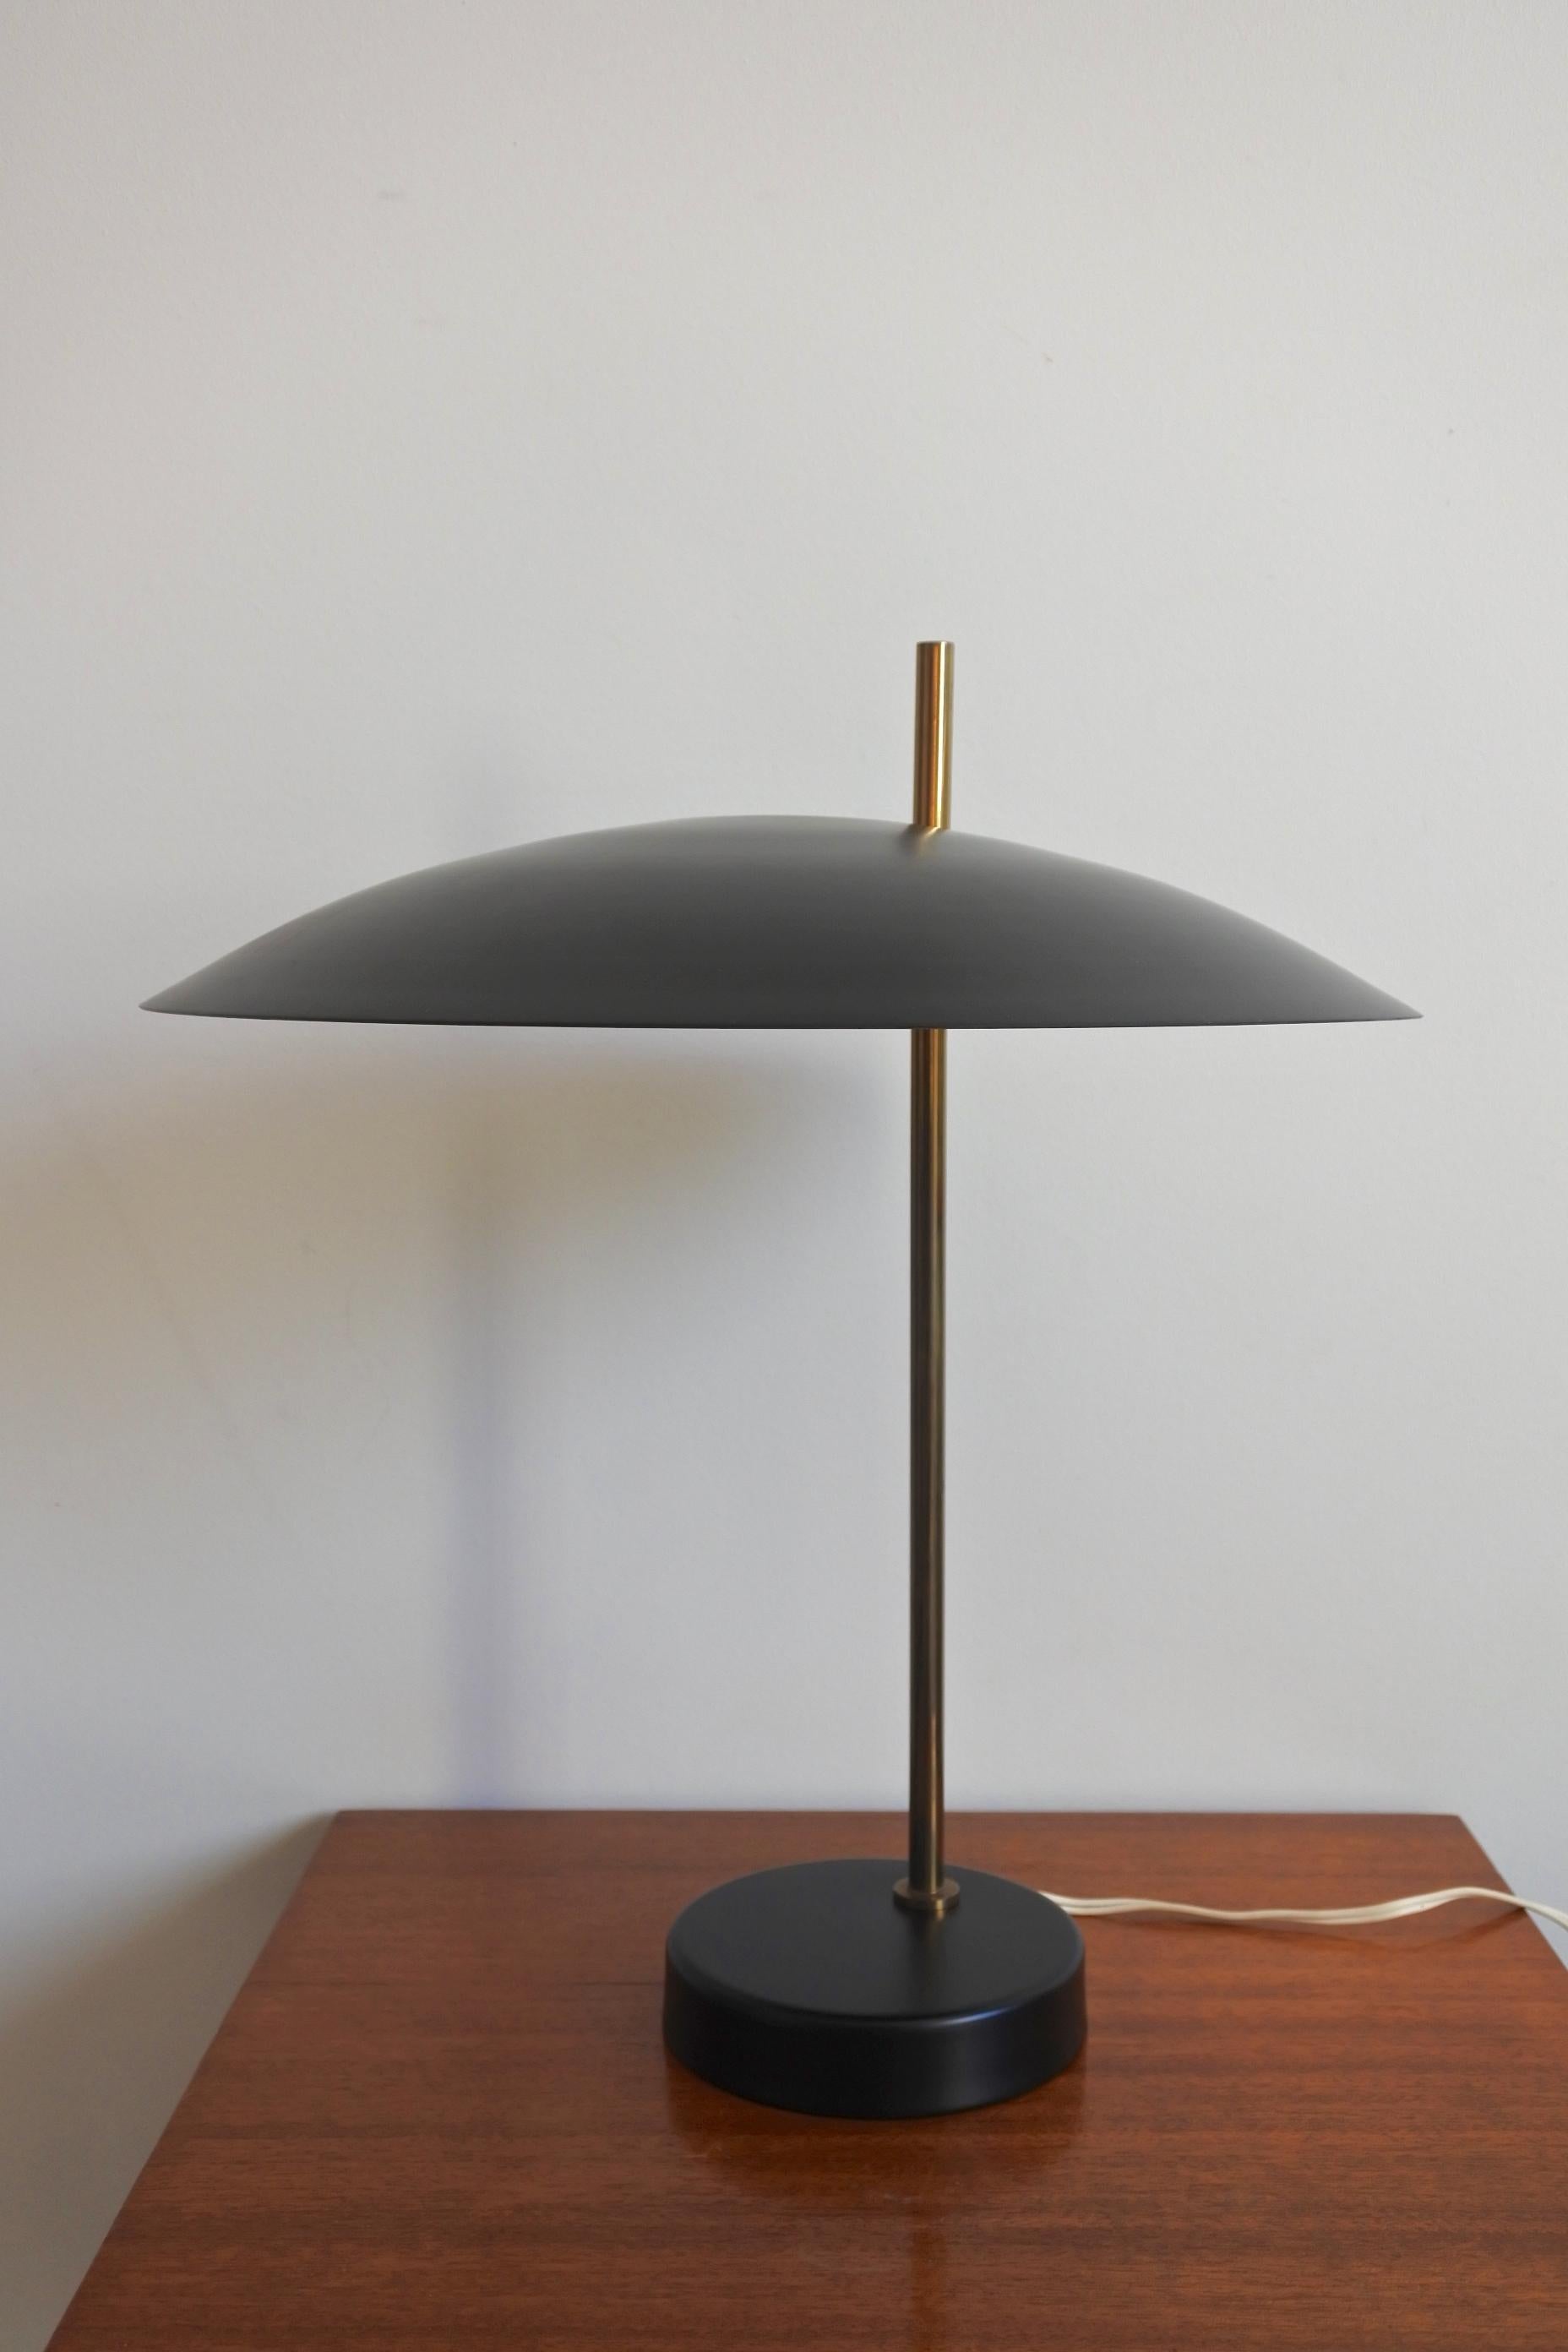 Table lamp by French designer and distributor Pierre Disderot.
Model 1013.
Brass and black lacquered metal.
Original edition from the 1950s.

Outstanding quality, original wiring and original gold varnish to the brass.

Pierre Disderot